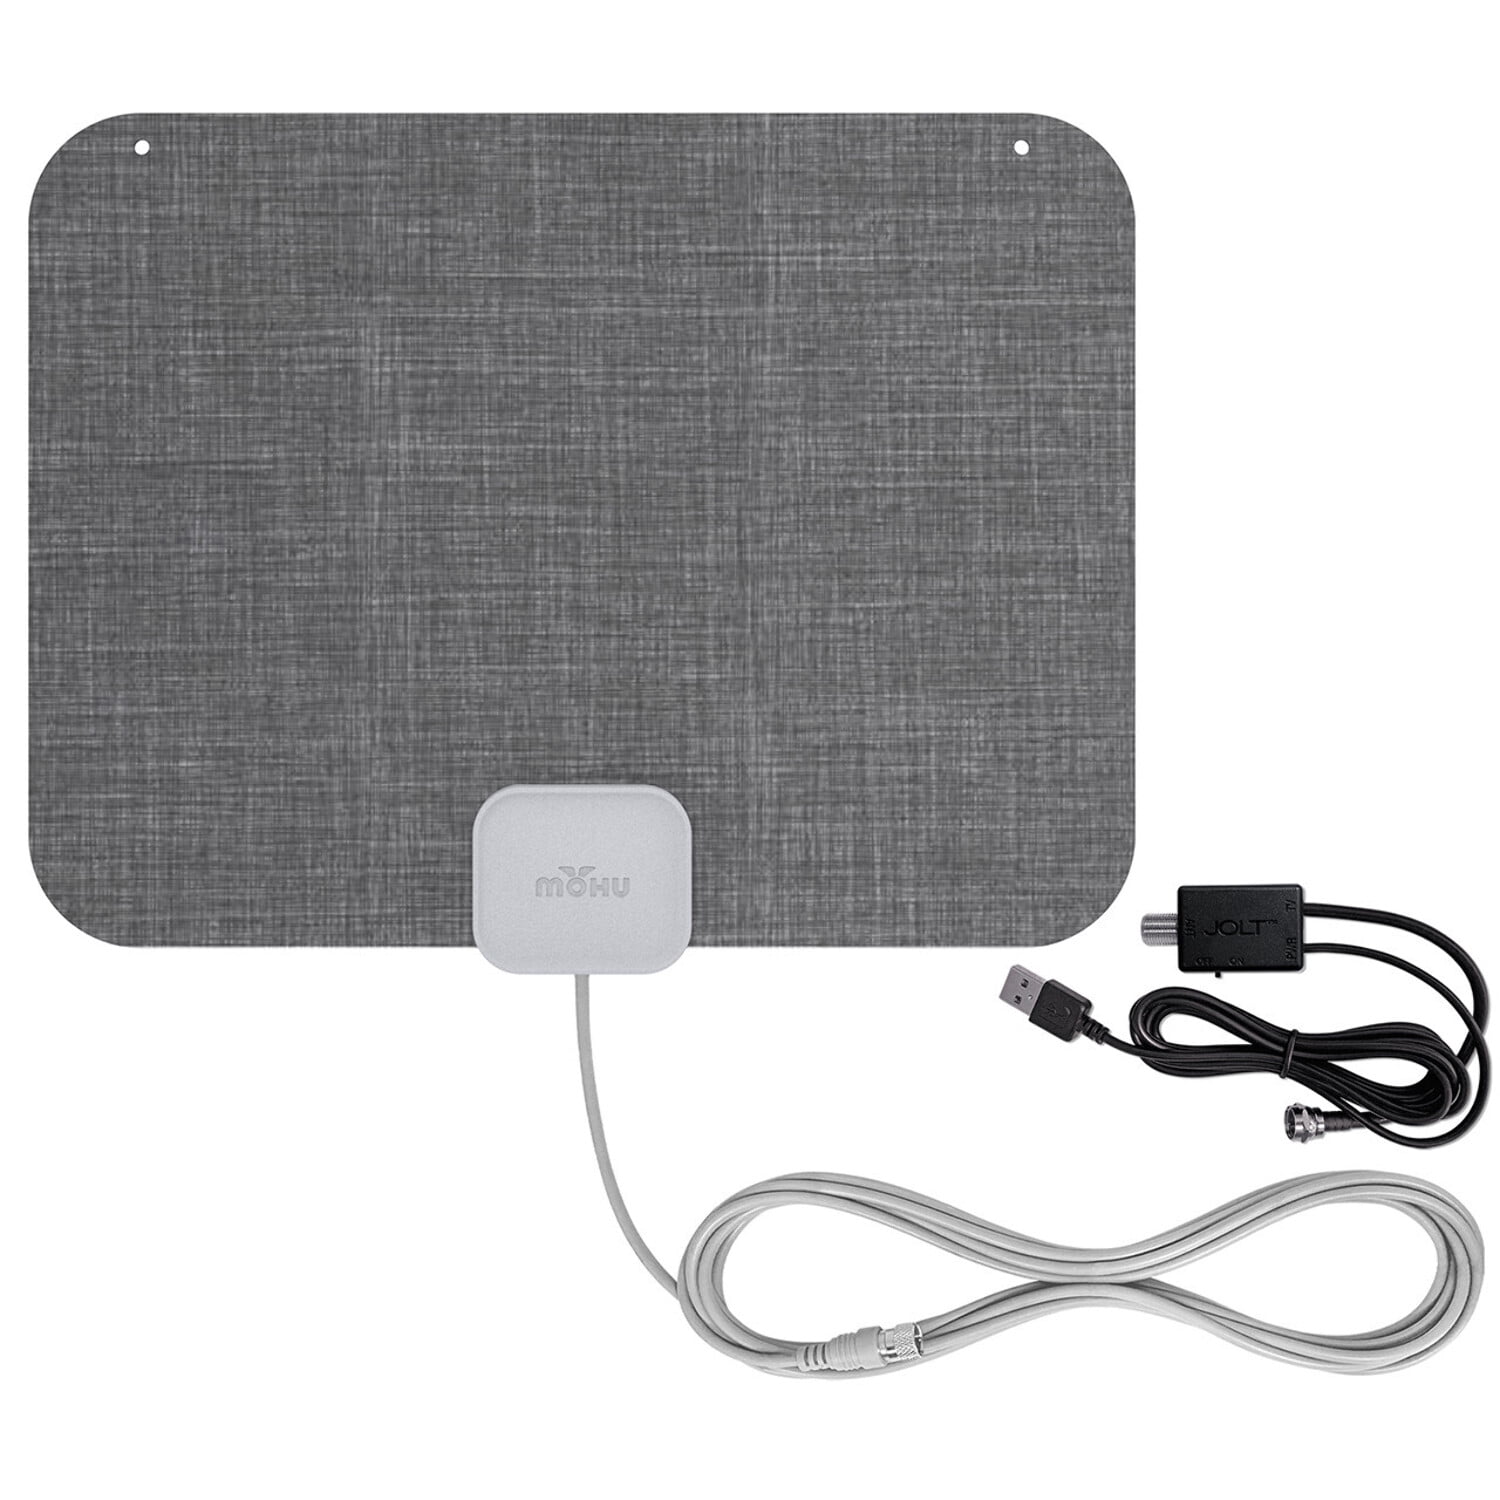 Mohu Leaf Stitch Amplified Indoor HDTV Antenna (Grey Tweed) with 12 ft ...